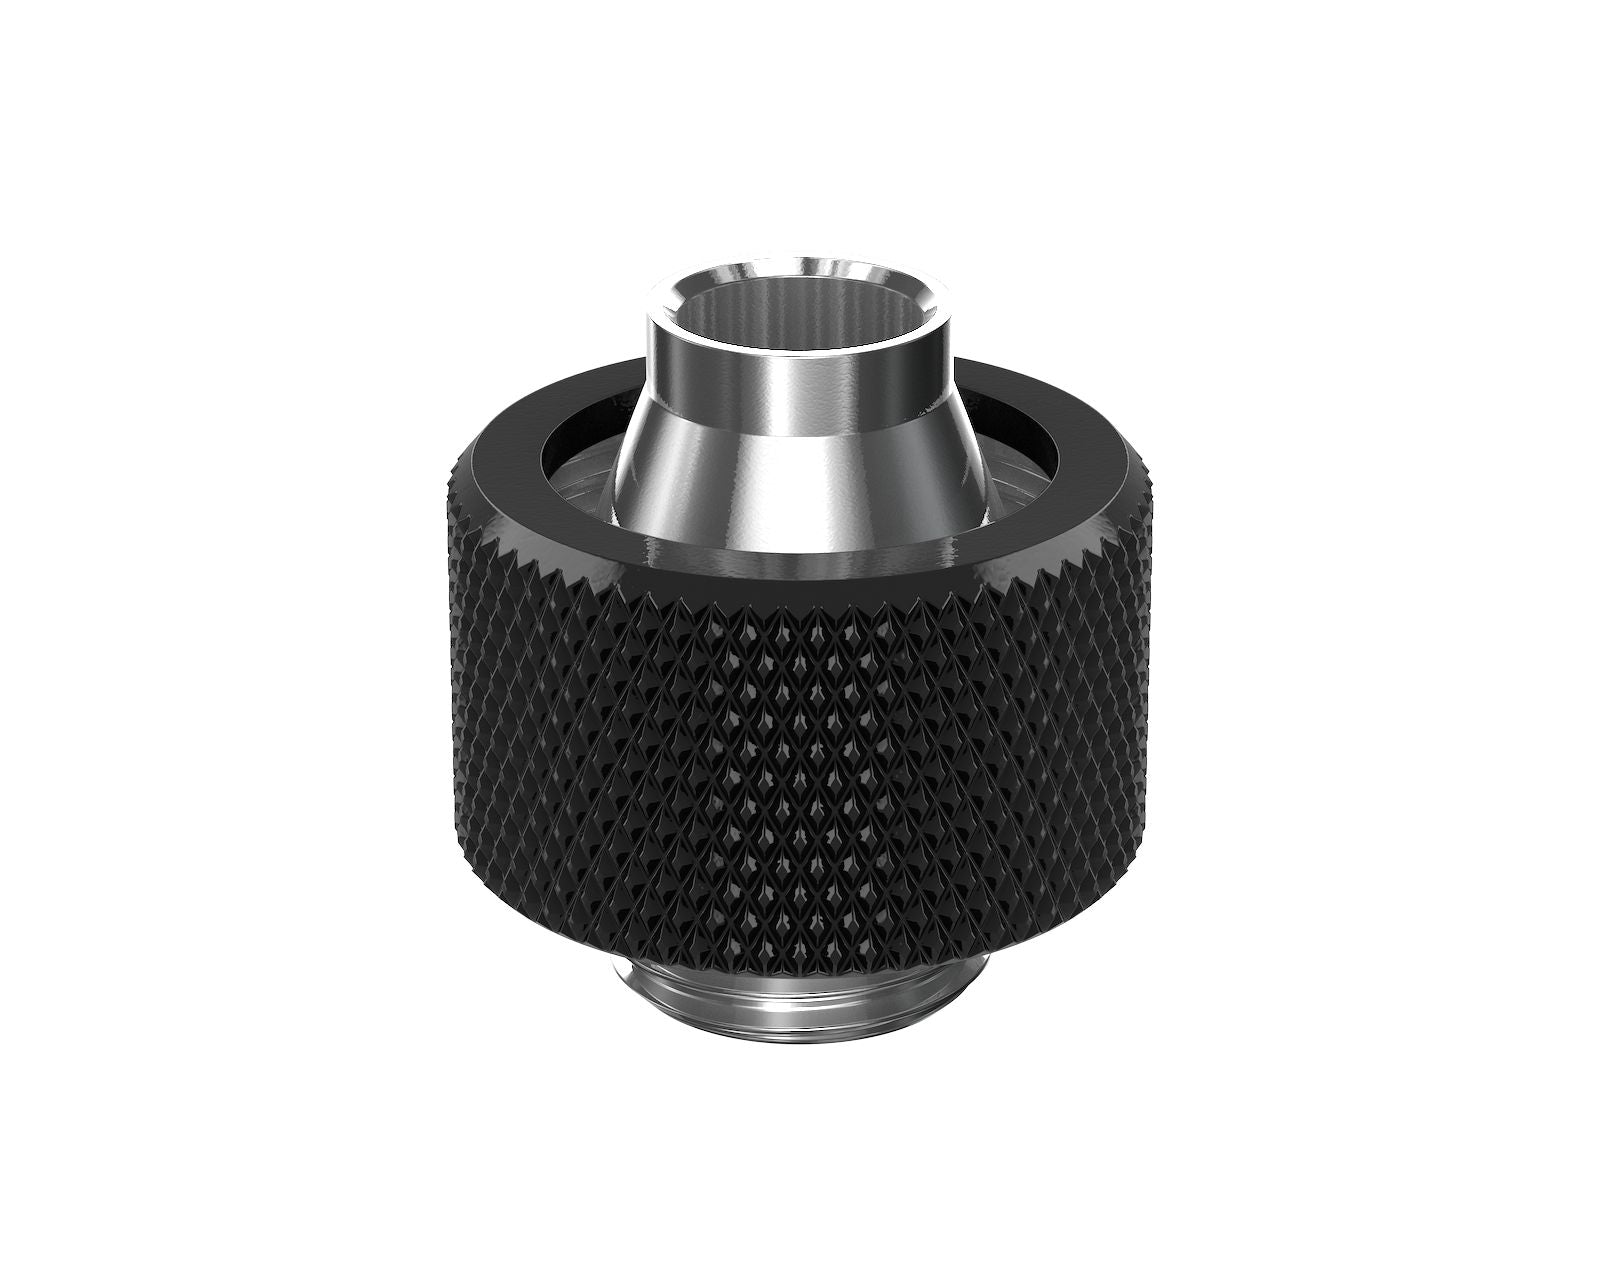 PrimoChill SecureFit SX - Premium Compression Fitting For 3/8in ID x 5/8in OD Flexible Tubing (F-SFSX58) - Available in 20+ Colors, Custom Watercooling Loop Ready - Satin Black